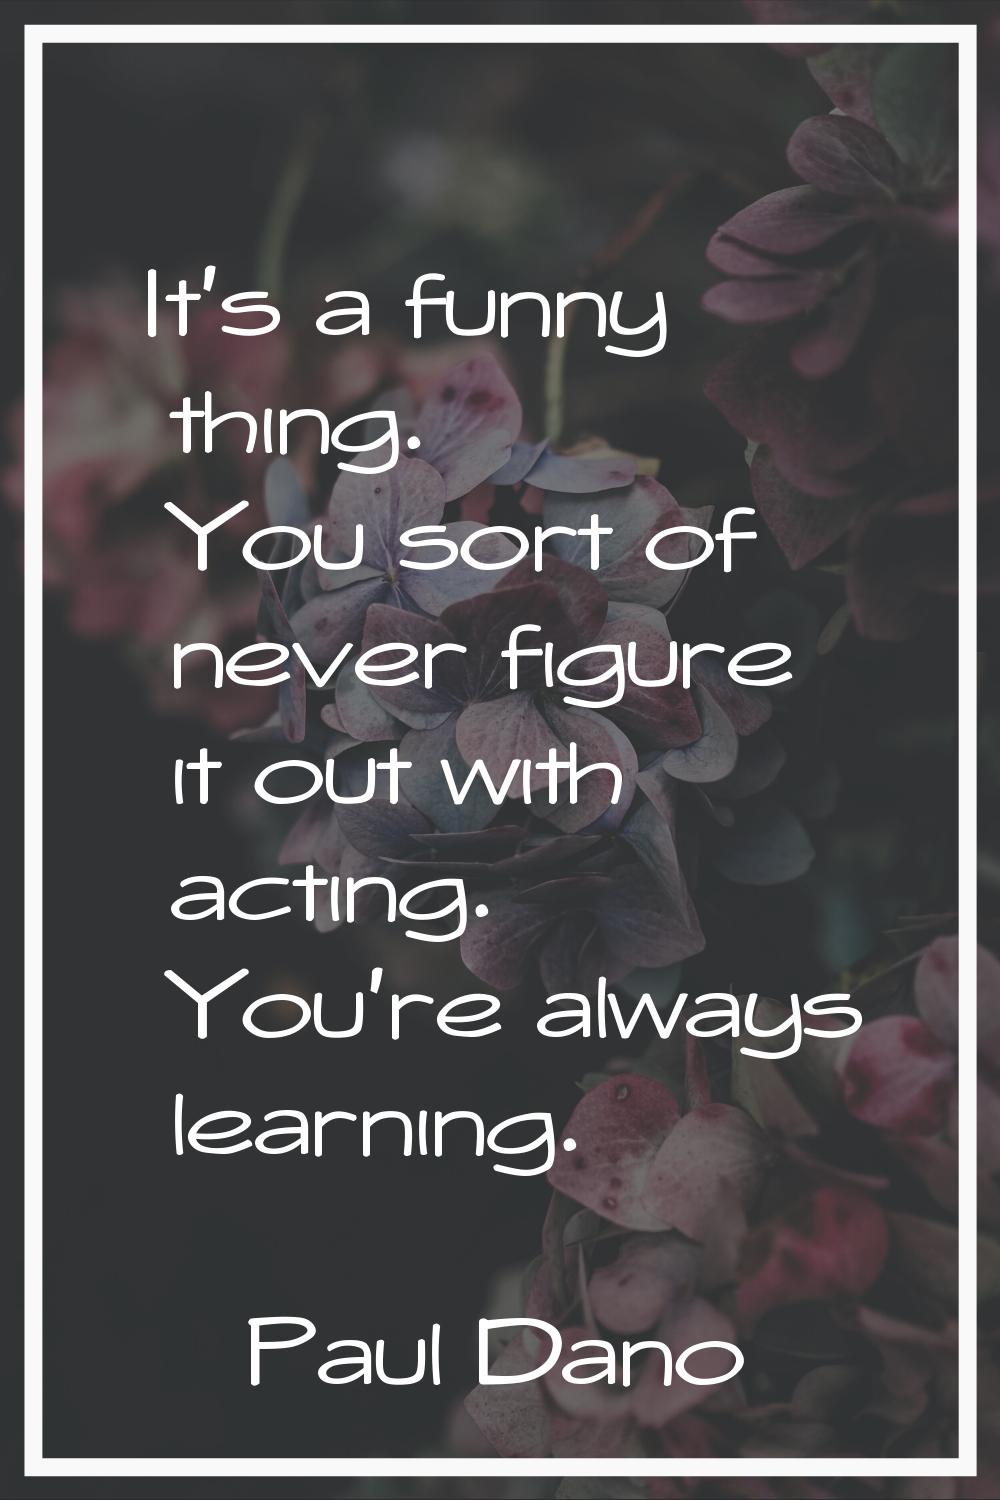 It's a funny thing. You sort of never figure it out with acting. You're always learning.